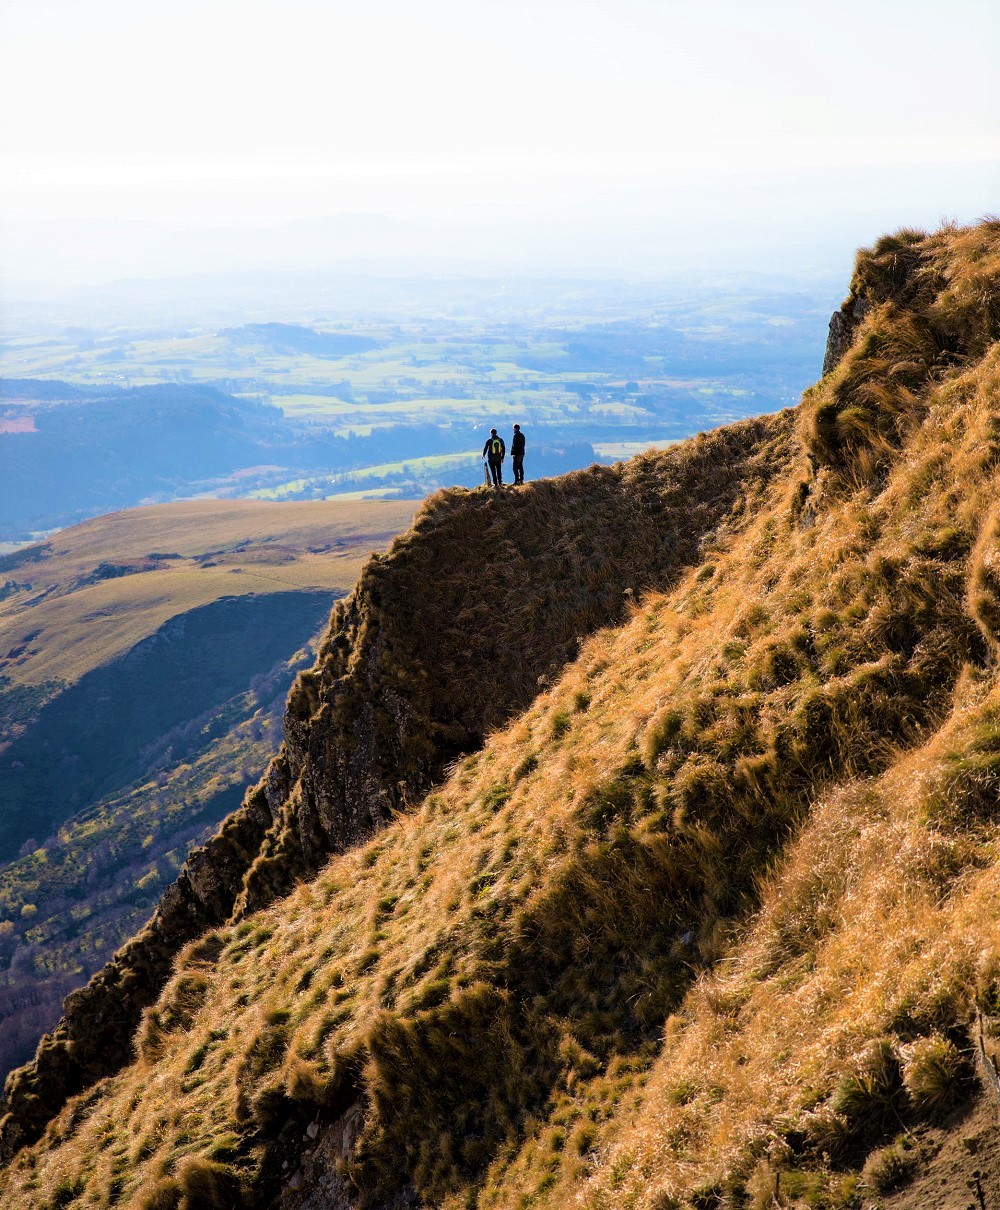 Characterised by its remote and rugged landscape, vast valleys and dense forests, the Auvergne is France’s best kept secret.